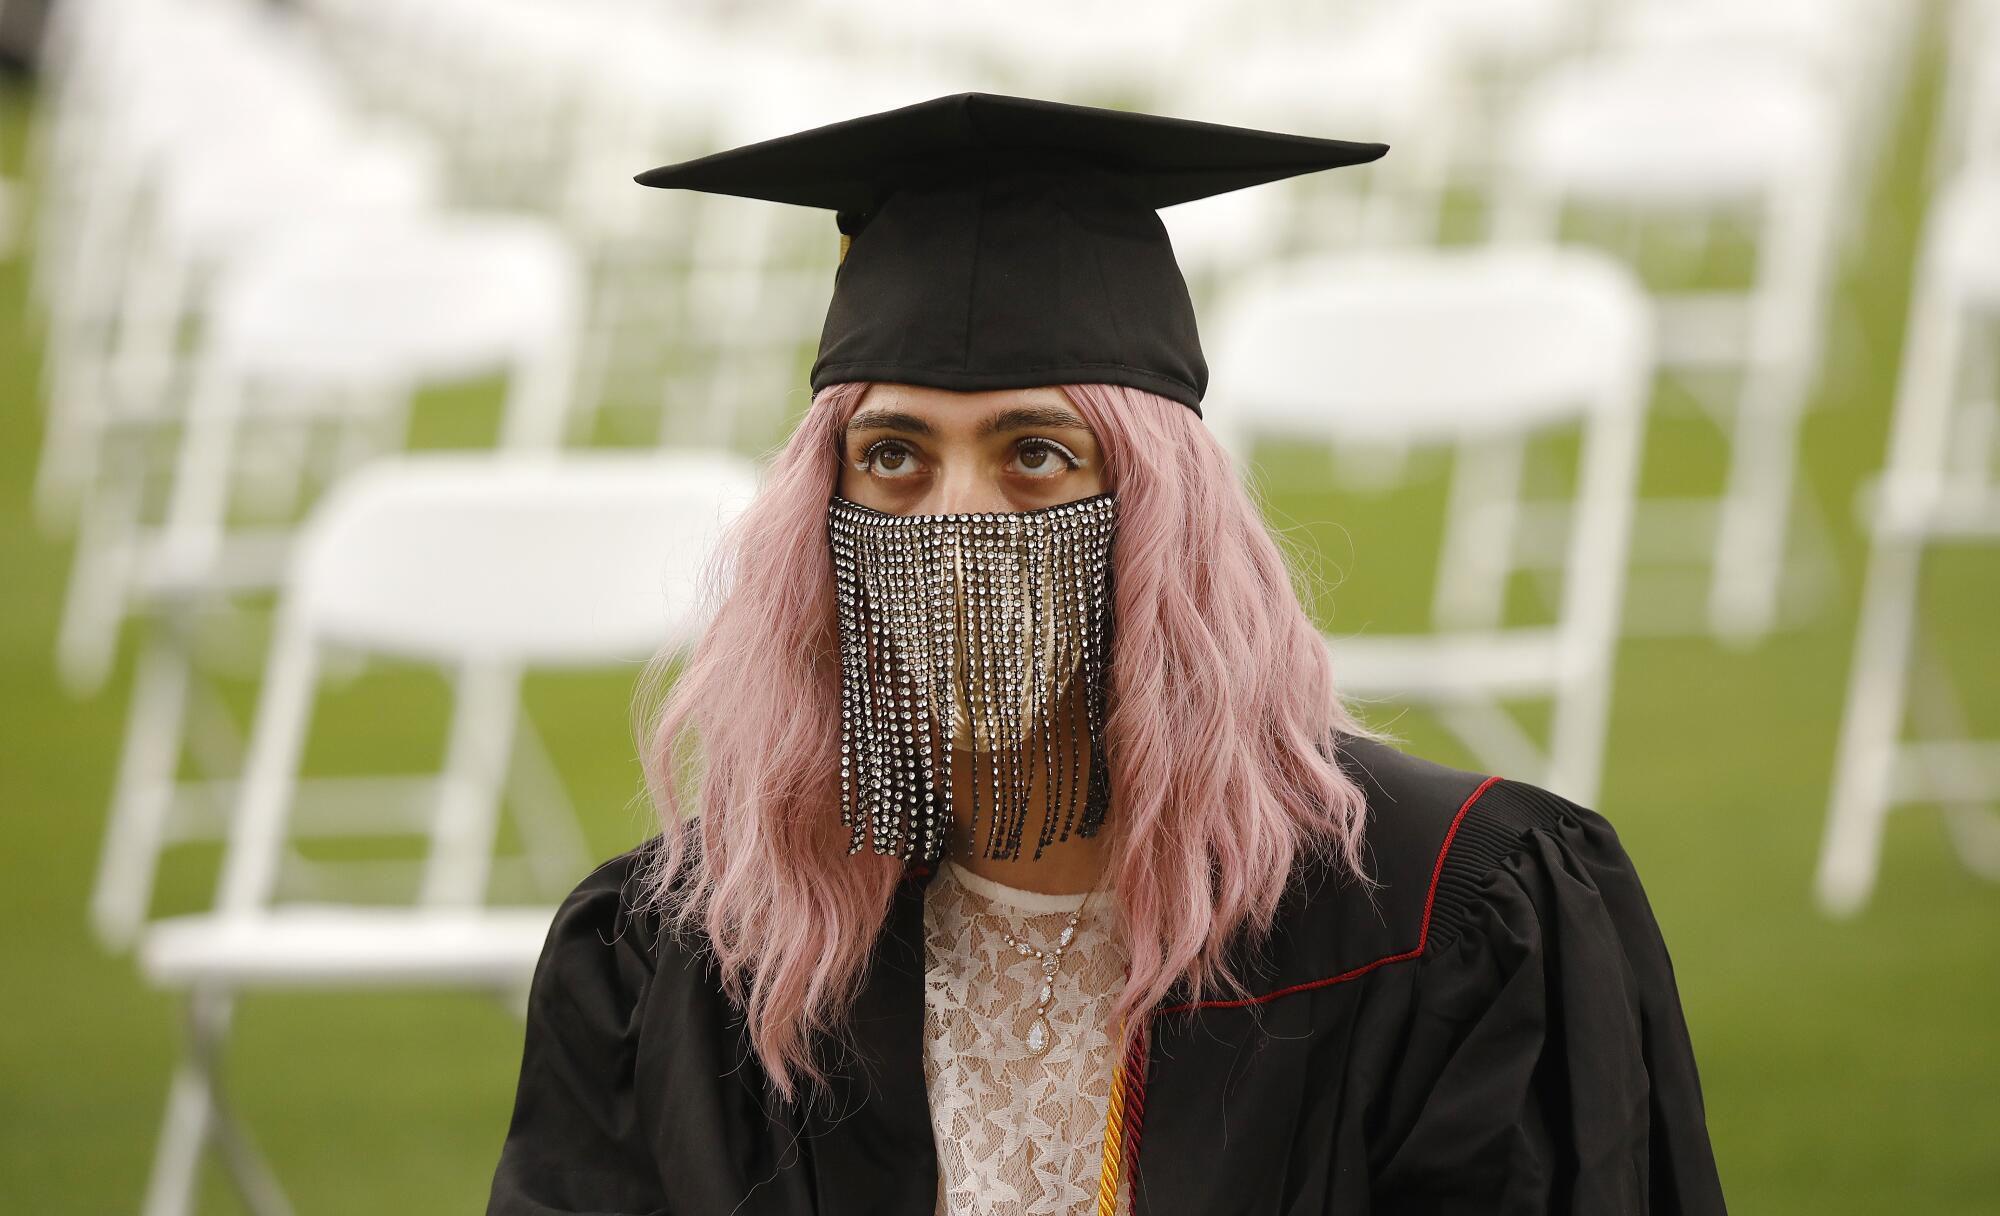  Ecstasy Plant is graduating with a BA in art wears a unique mask.